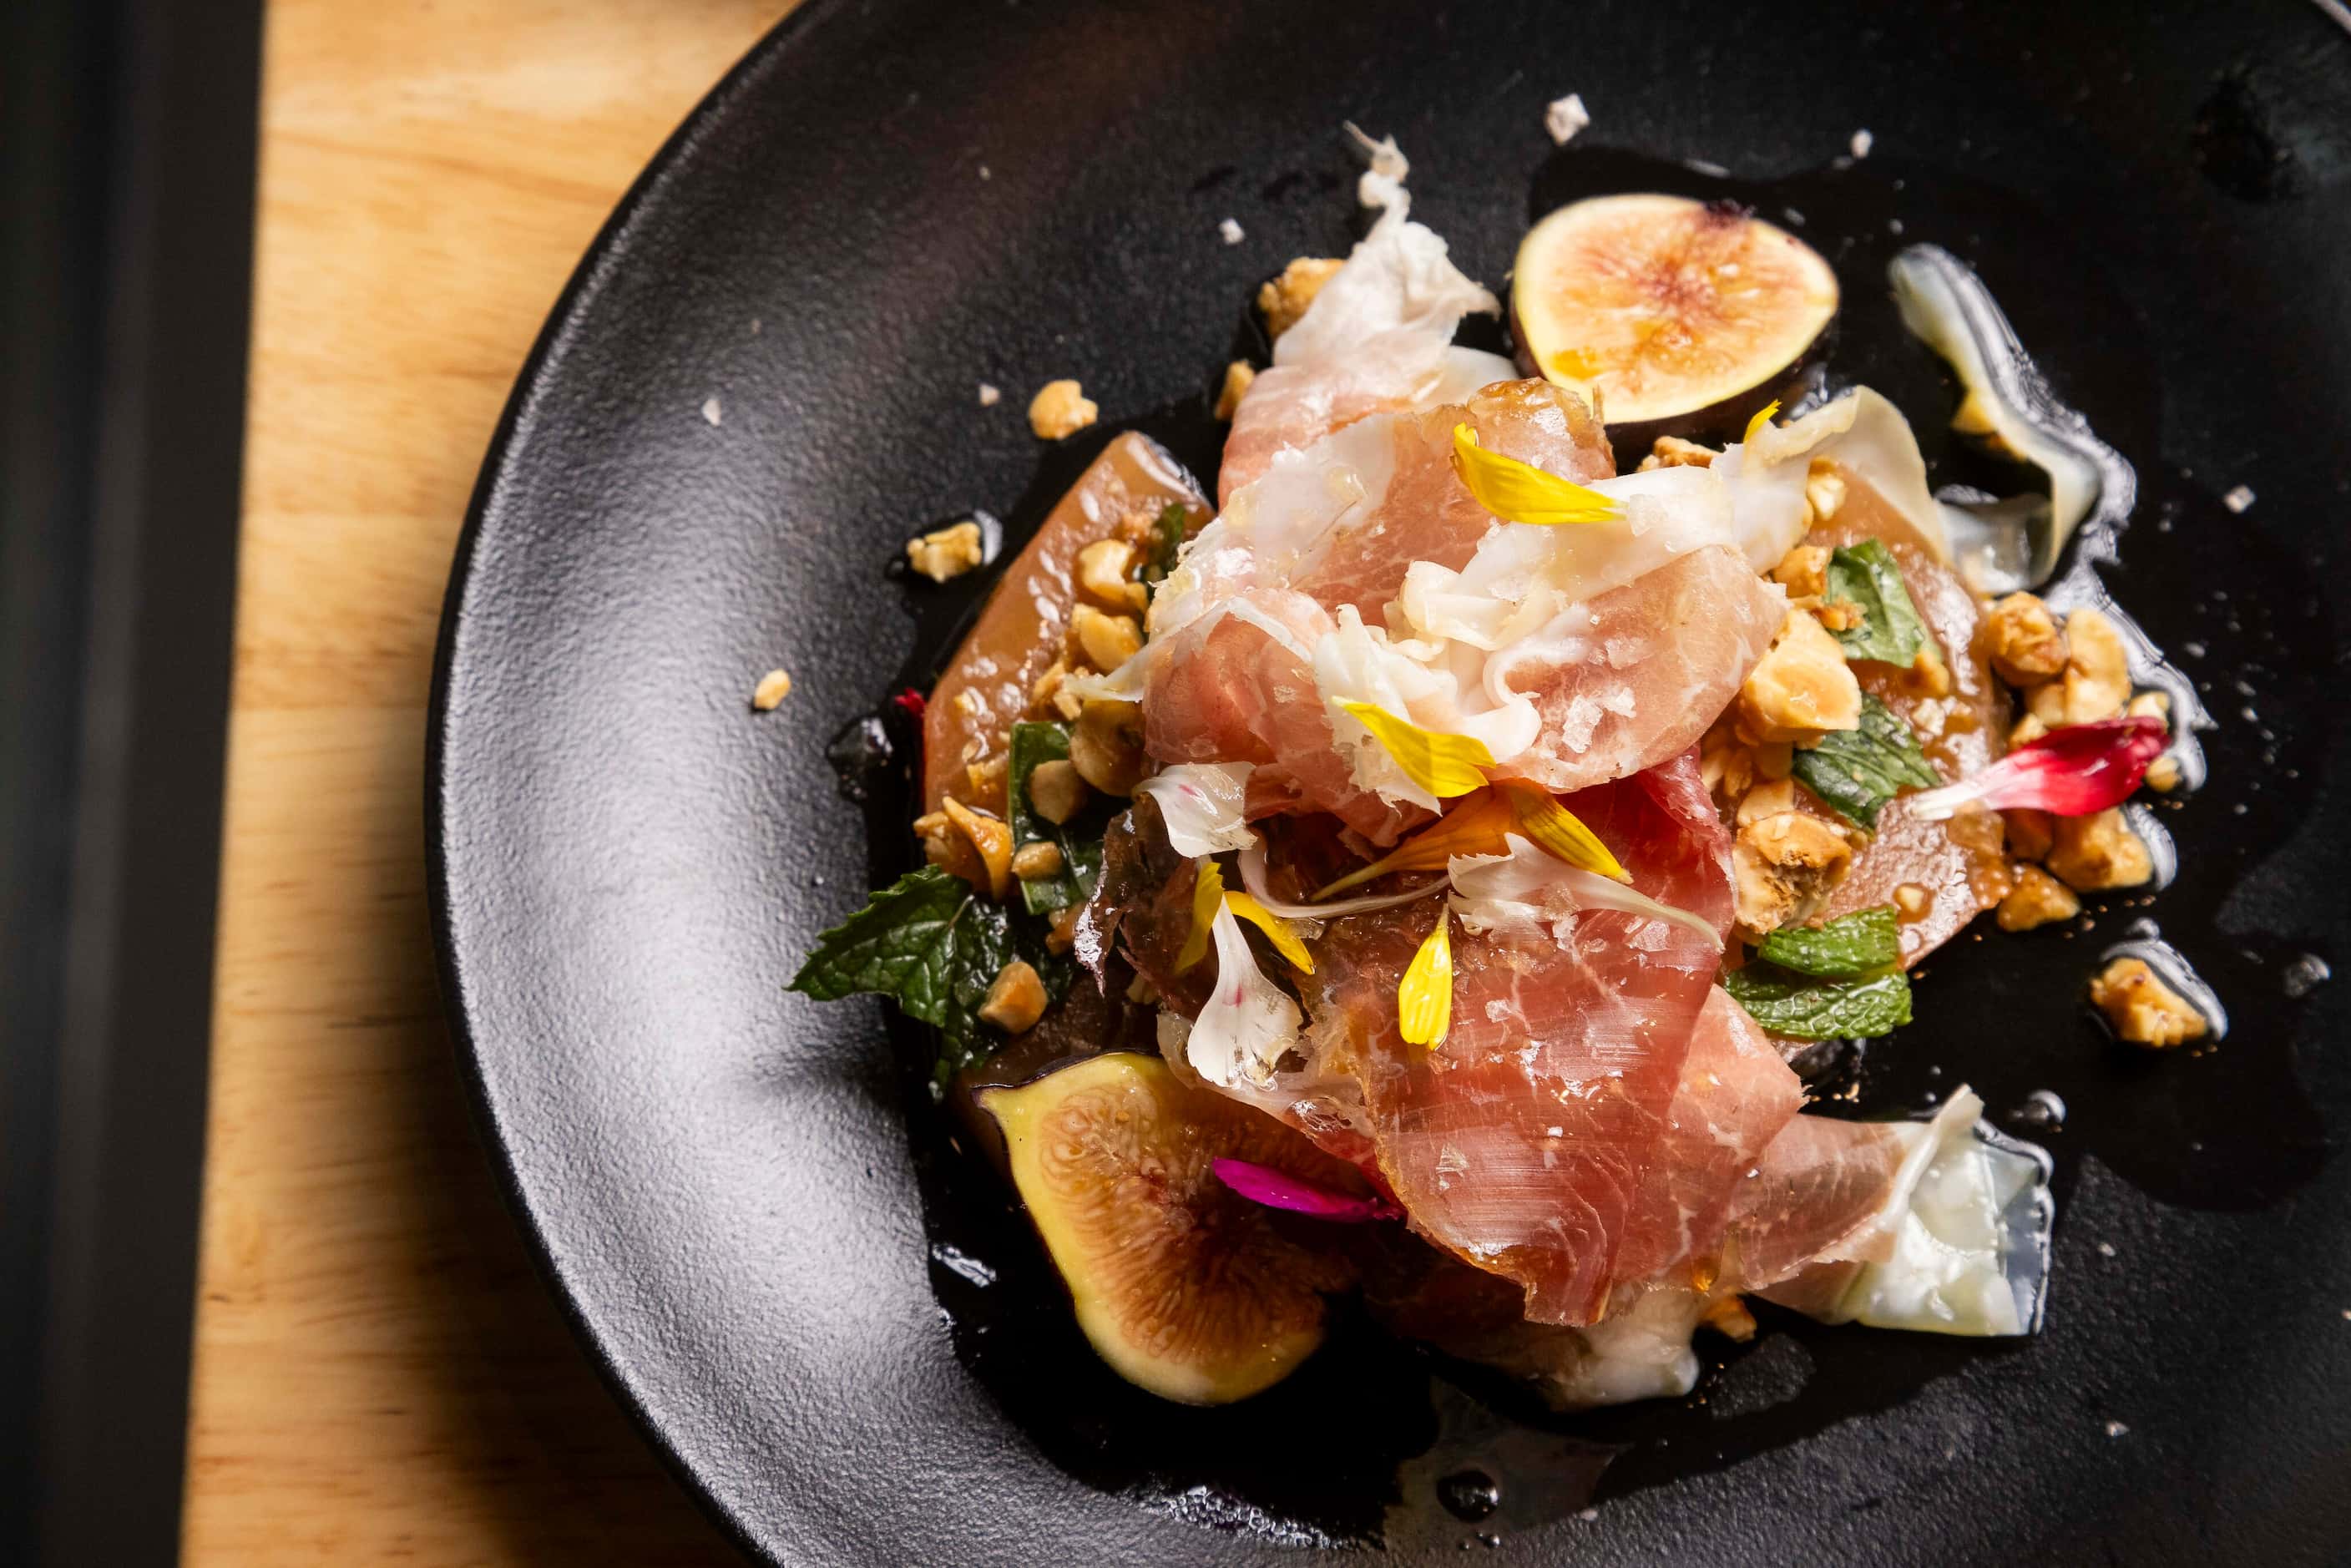 The Prosciutto e Melone dish was created because Derry wanted to find a way to incorporate a...